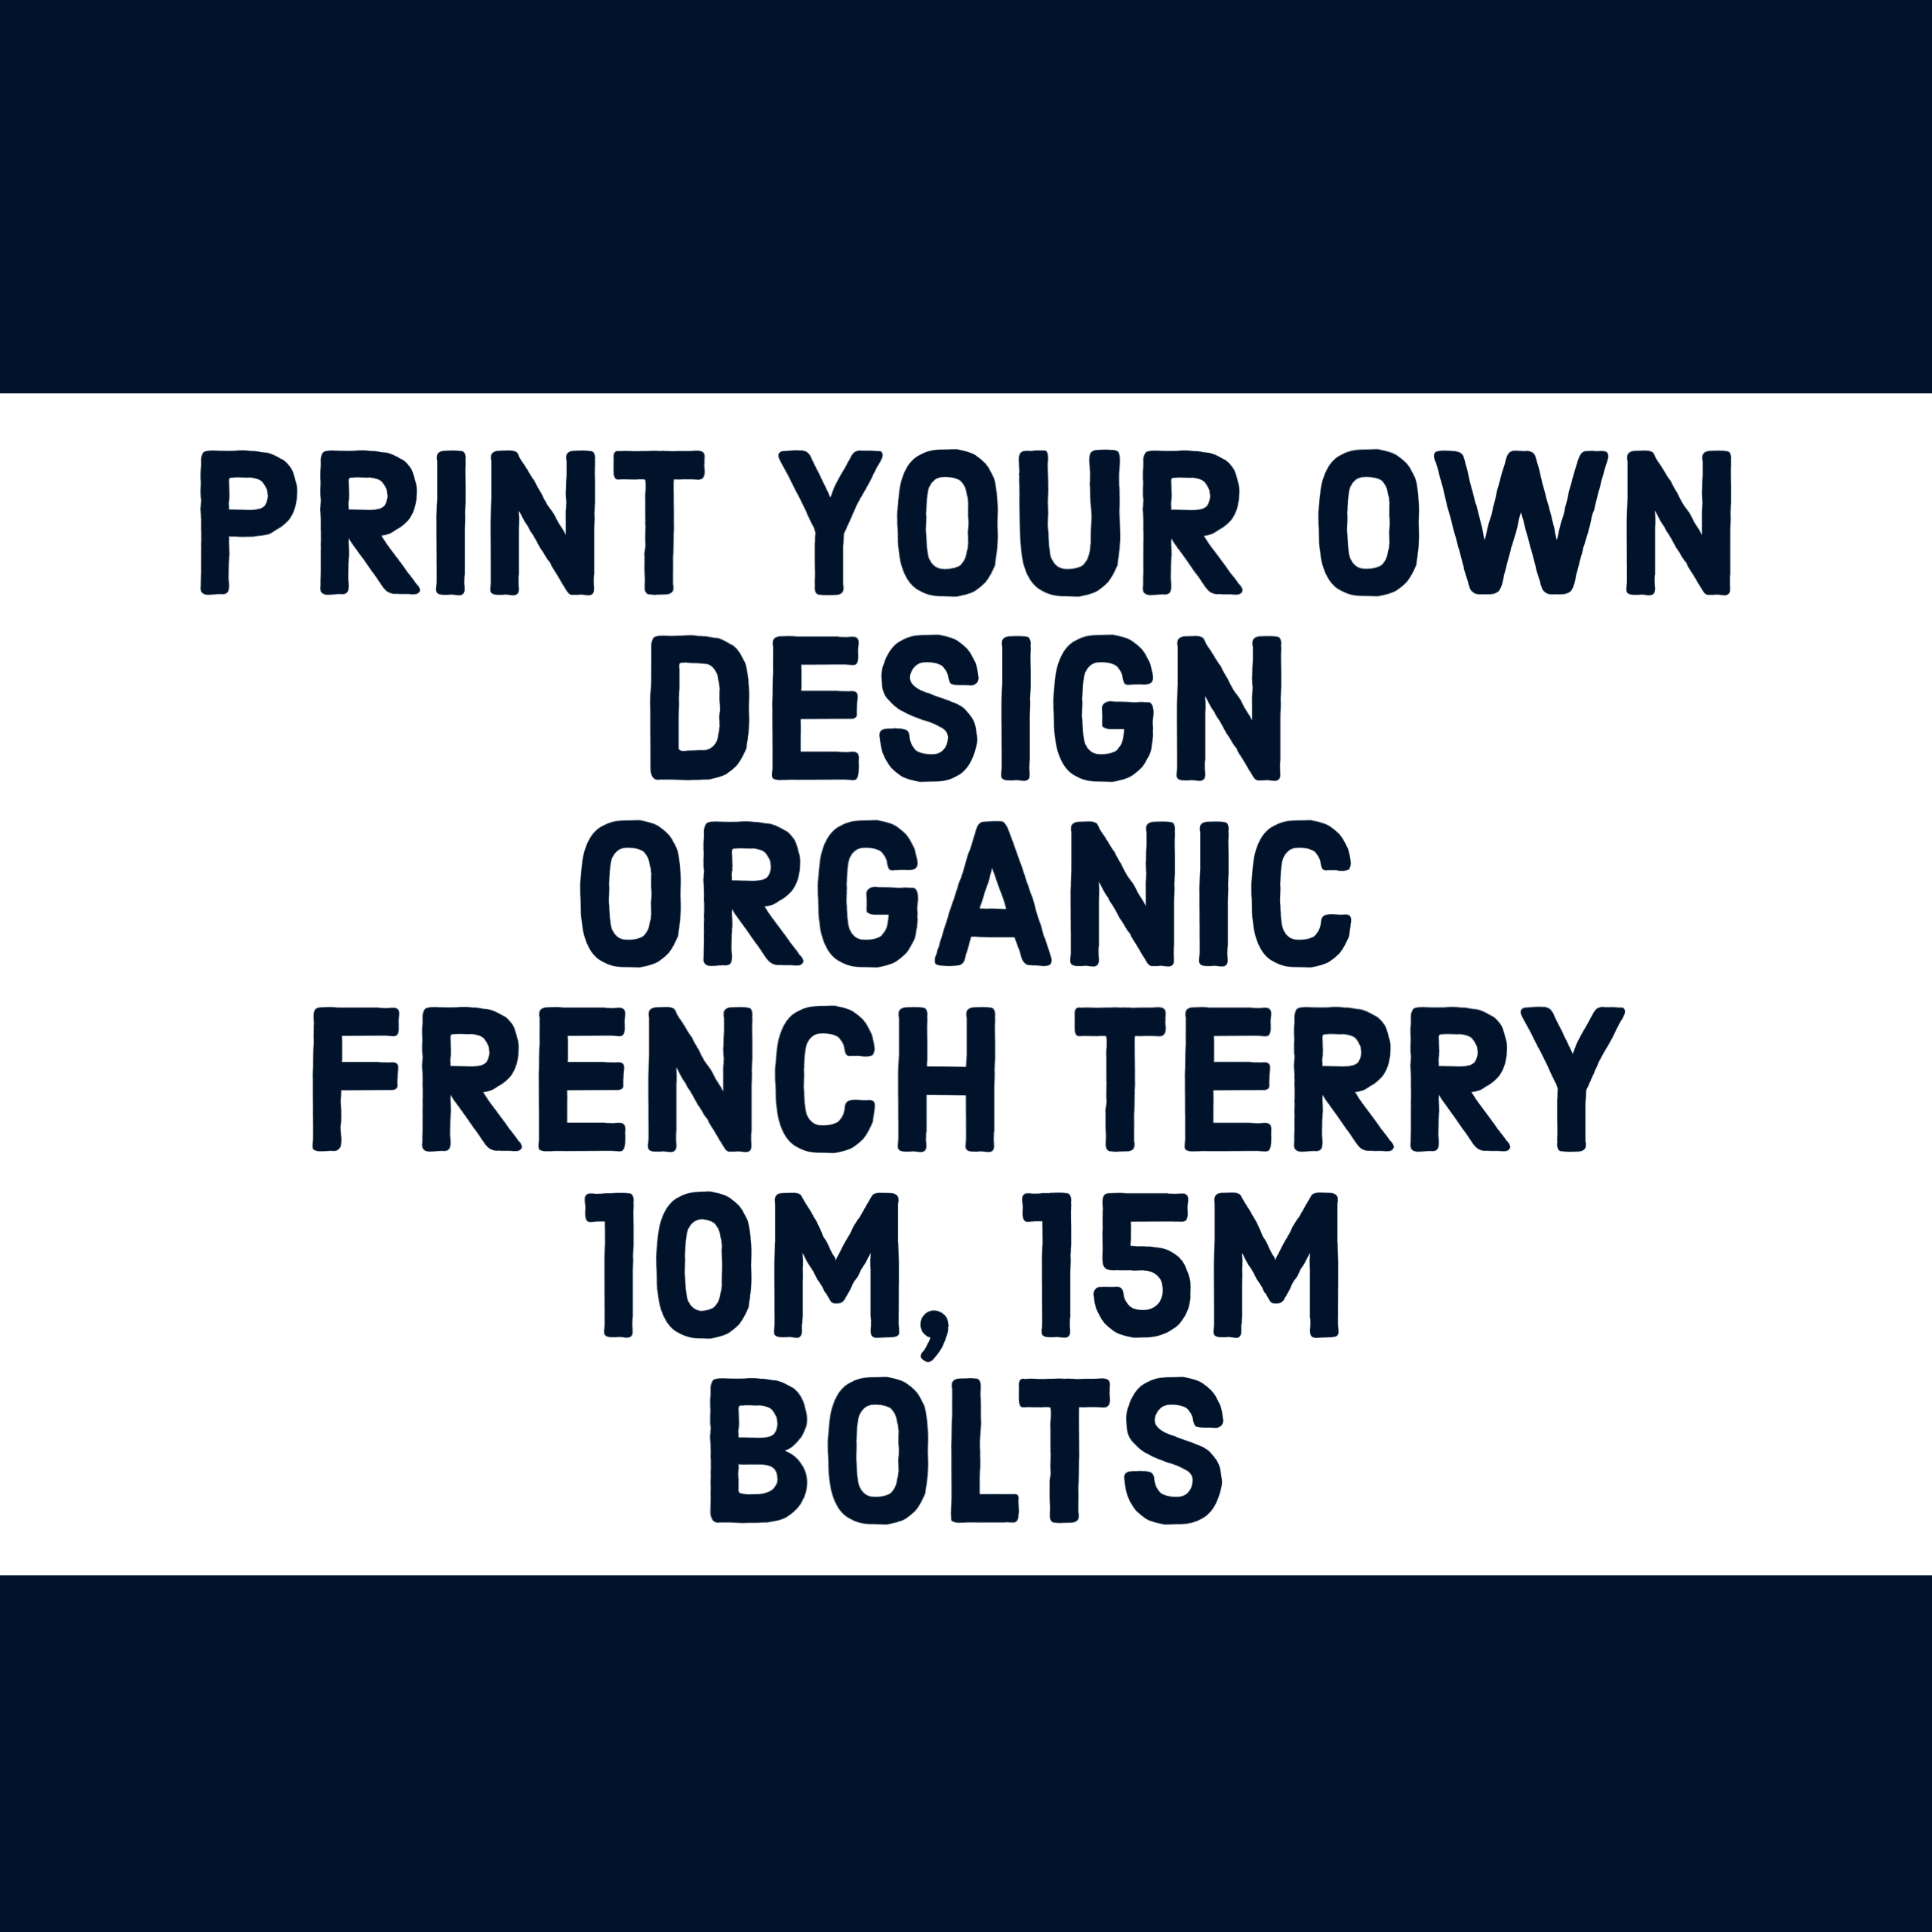 Print Your Own Design ORGANIC FRENCH TERRY